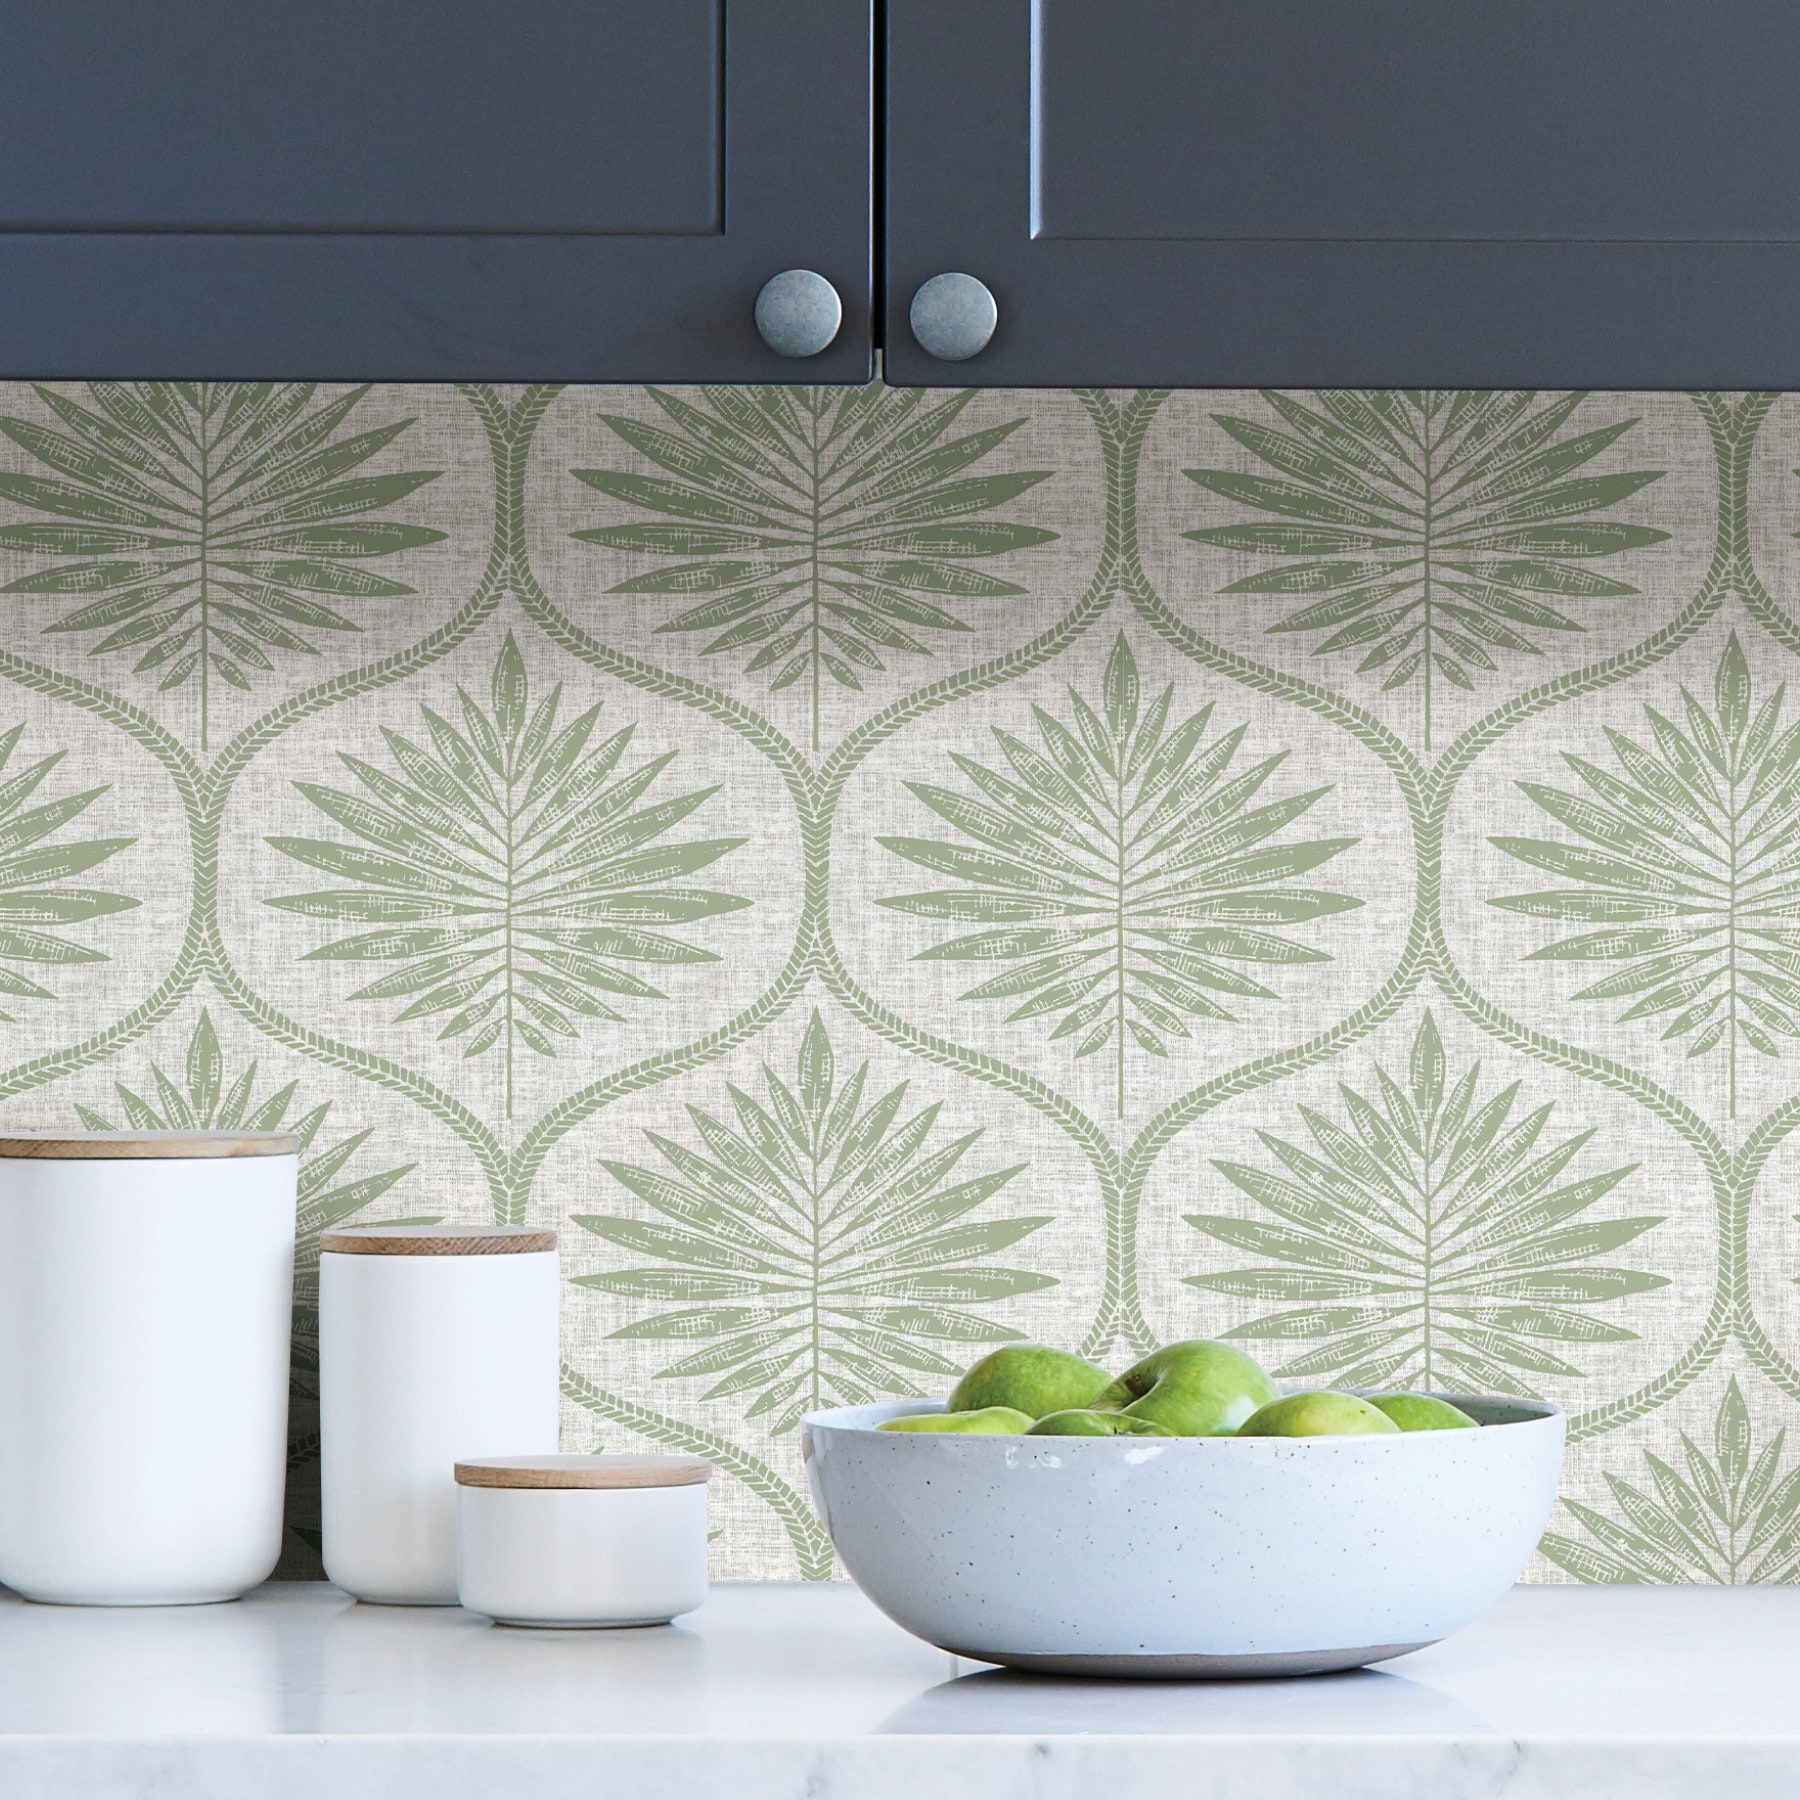 Wallpaper has made a comeback accent walls and focal points are fun